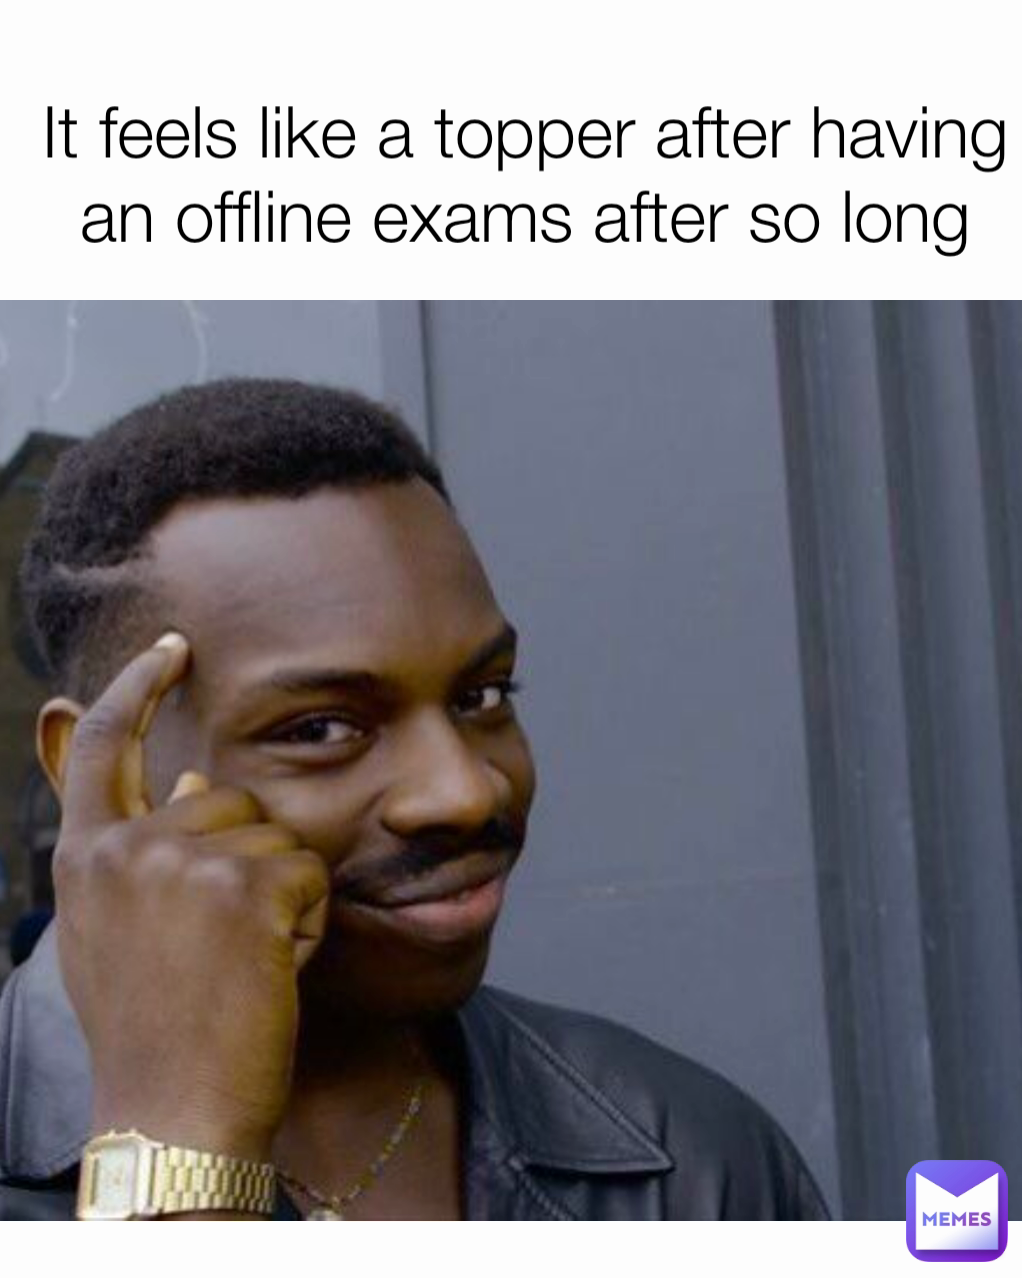 It feels like a topper after having an offline exams after so long